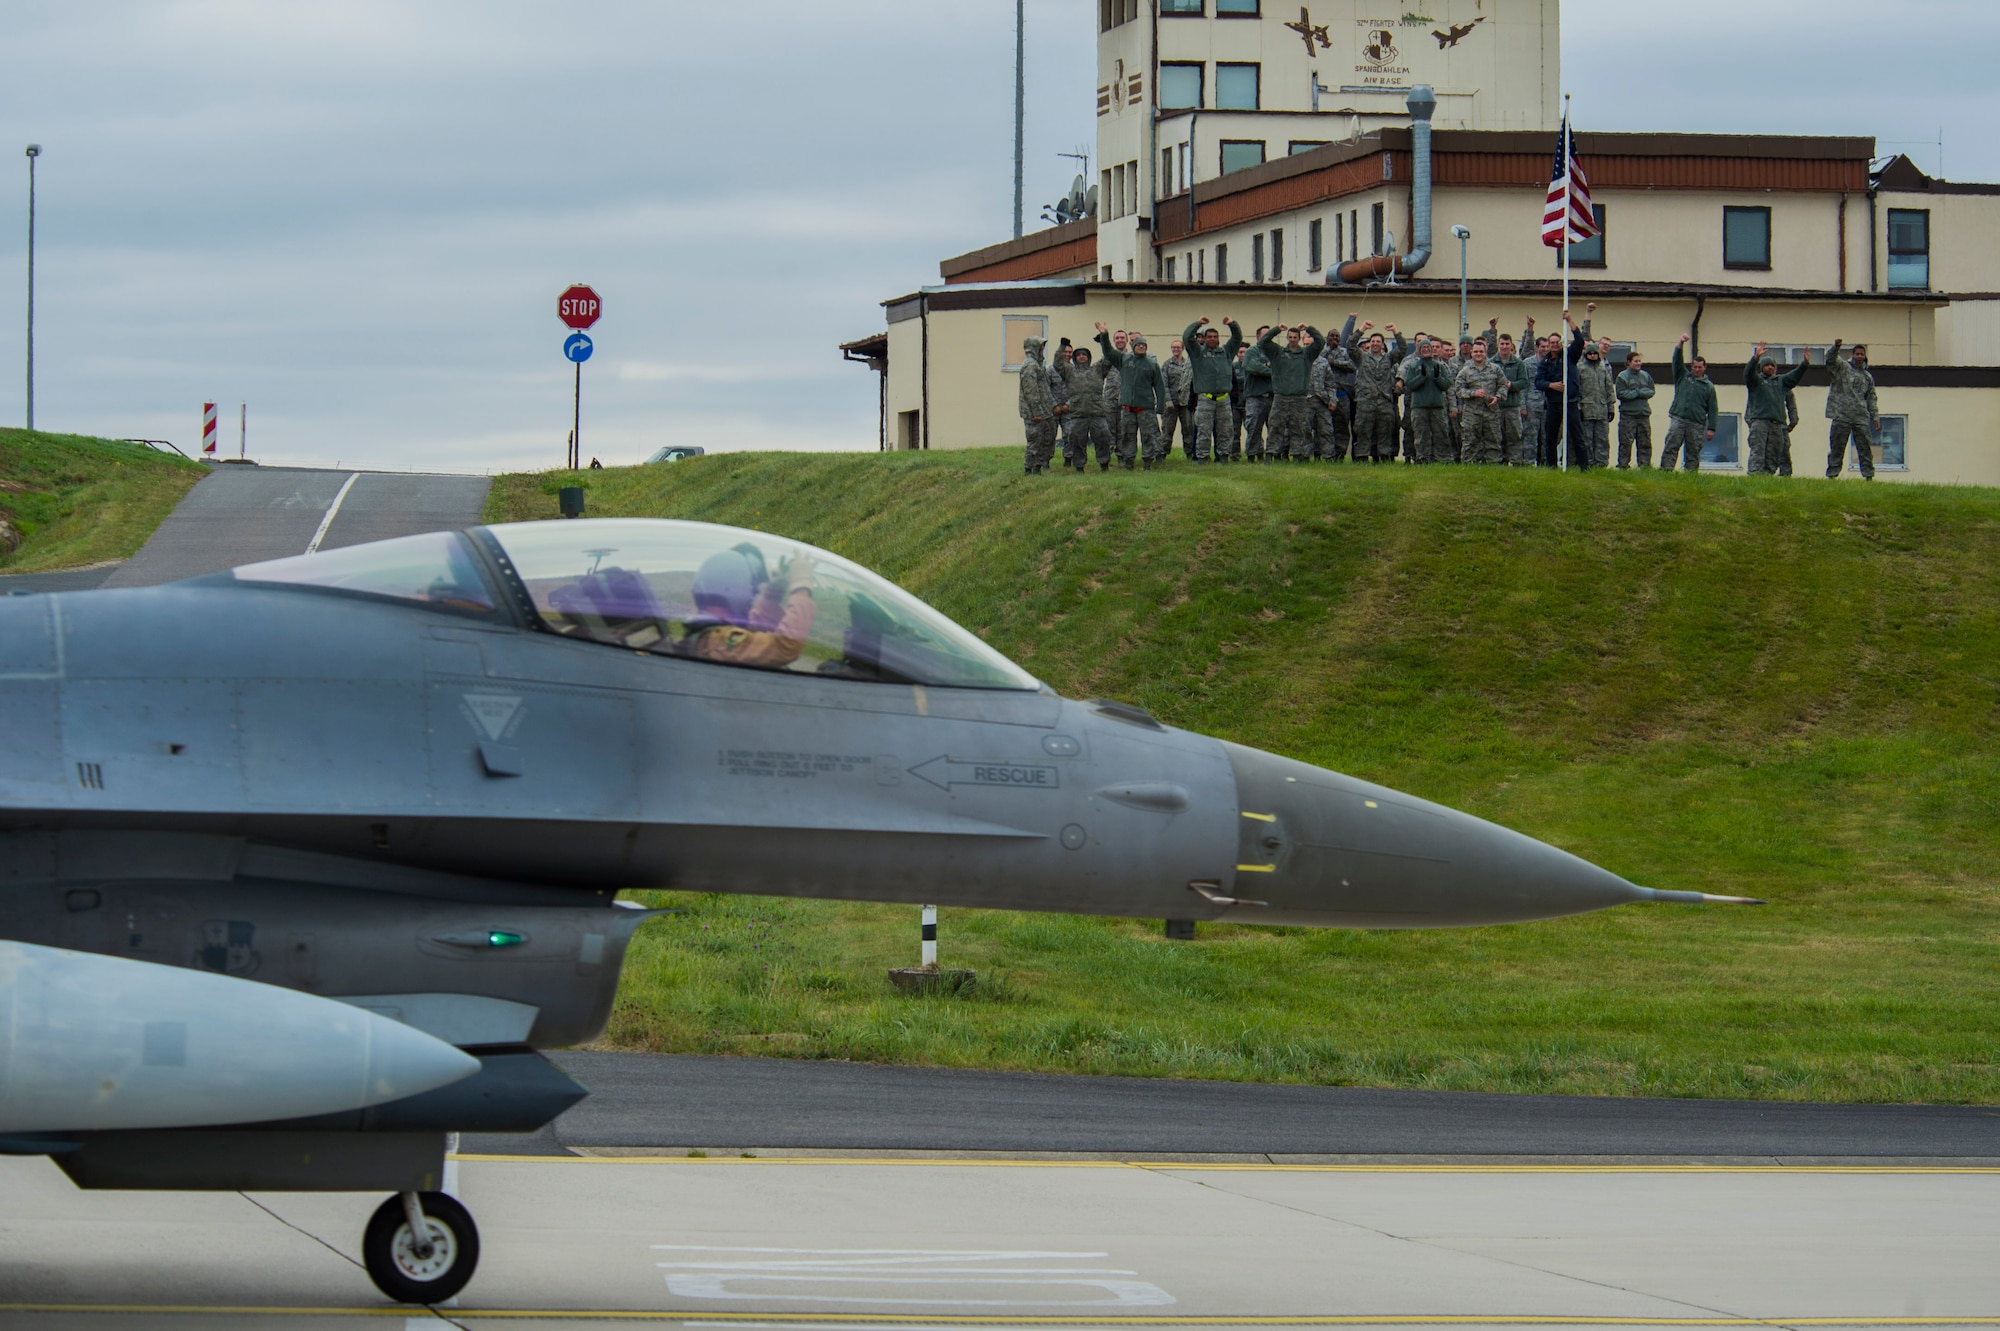 Airmen assigned to the 52nd Fighter Wing wave as an F-16 Fighting Falcon fighter aircraft pilot assigned to the 480th Expeditionary Fighter Squadron during the squadron’s return to Spangdahlem Air Base, Germany, Oct. 6, 2016. Approximately 300 of the Airmen, who serve in flight, maintenance or support roles for the F-16, completed a six-month deployment to Southwest Asia by providing close air support and dynamic targeting operations as part of the squadron’s first deployment in support of Operation Inherent Resolve. Operation Inherent Resolve aims to eliminate the Da'esh terrorist group and the threat they pose to Iraq, Syria and the wider international community. (U.S. Air Force photo by Staff Sgt. Joe W. McFadden)